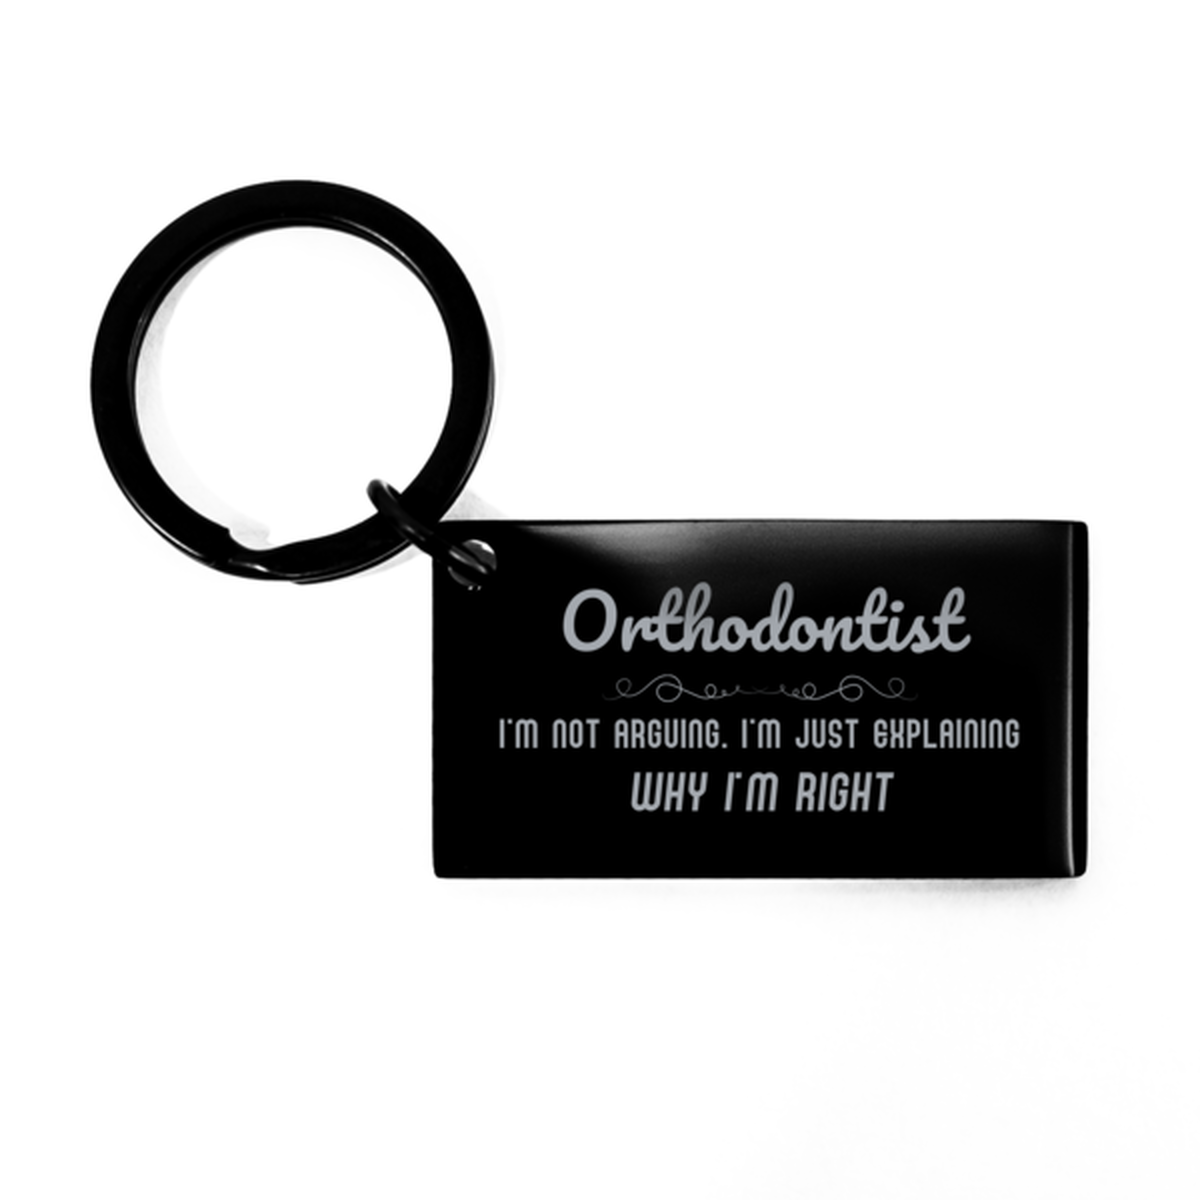 Orthodontist I'm not Arguing. I'm Just Explaining Why I'm RIGHT Keychain, Funny Saying Quote Orthodontist Gifts For Orthodontist Graduation Birthday Christmas Gifts for Men Women Coworker